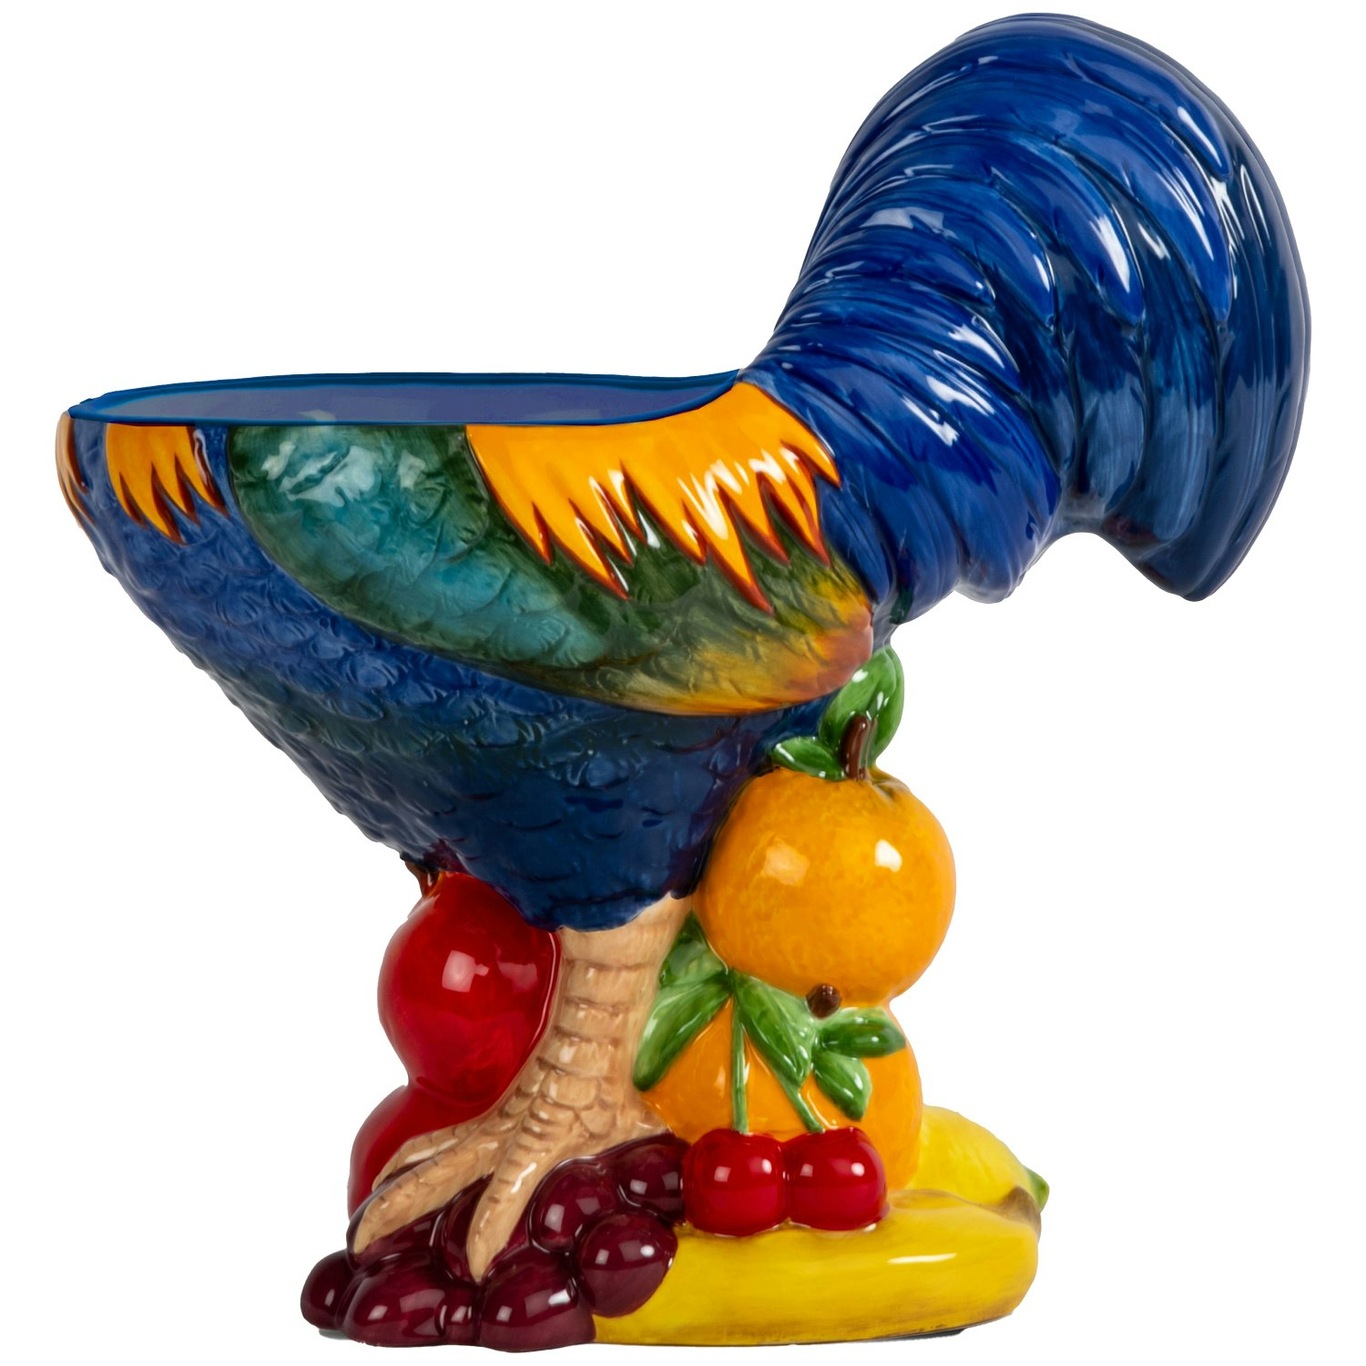 Fruity Rooster Bowl